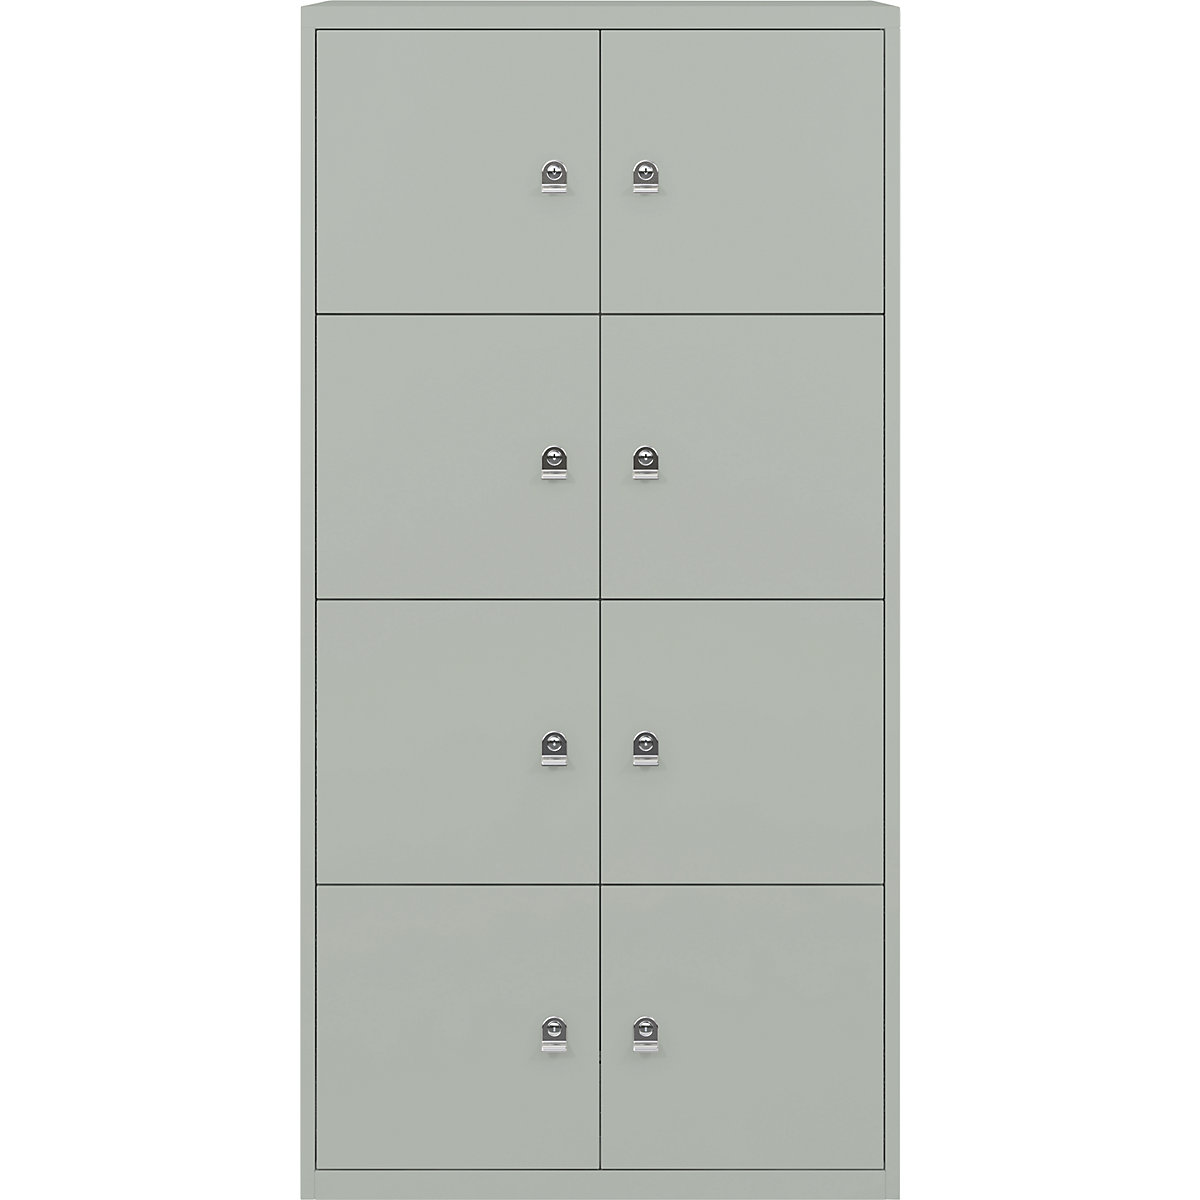 BISLEY – LateralFile™ lodge, with 8 lockable compartments, height 375 mm each, york